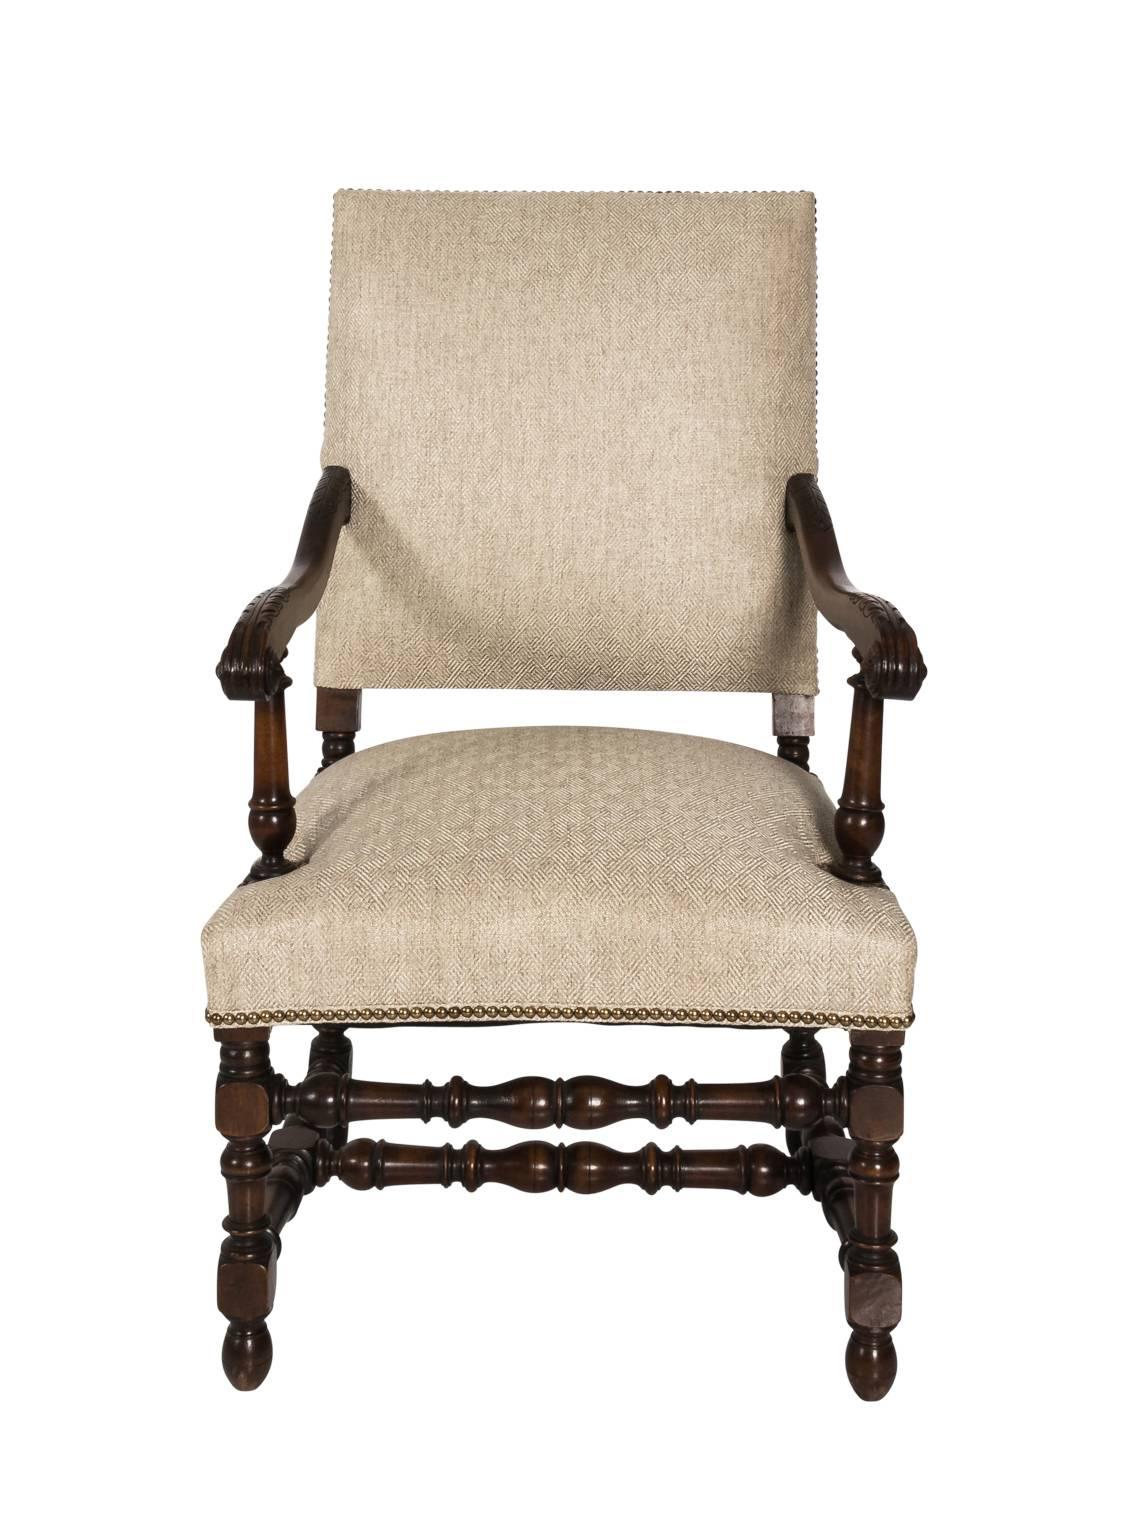 Pair of French walnut armchairs, circa 1860-1880.
 